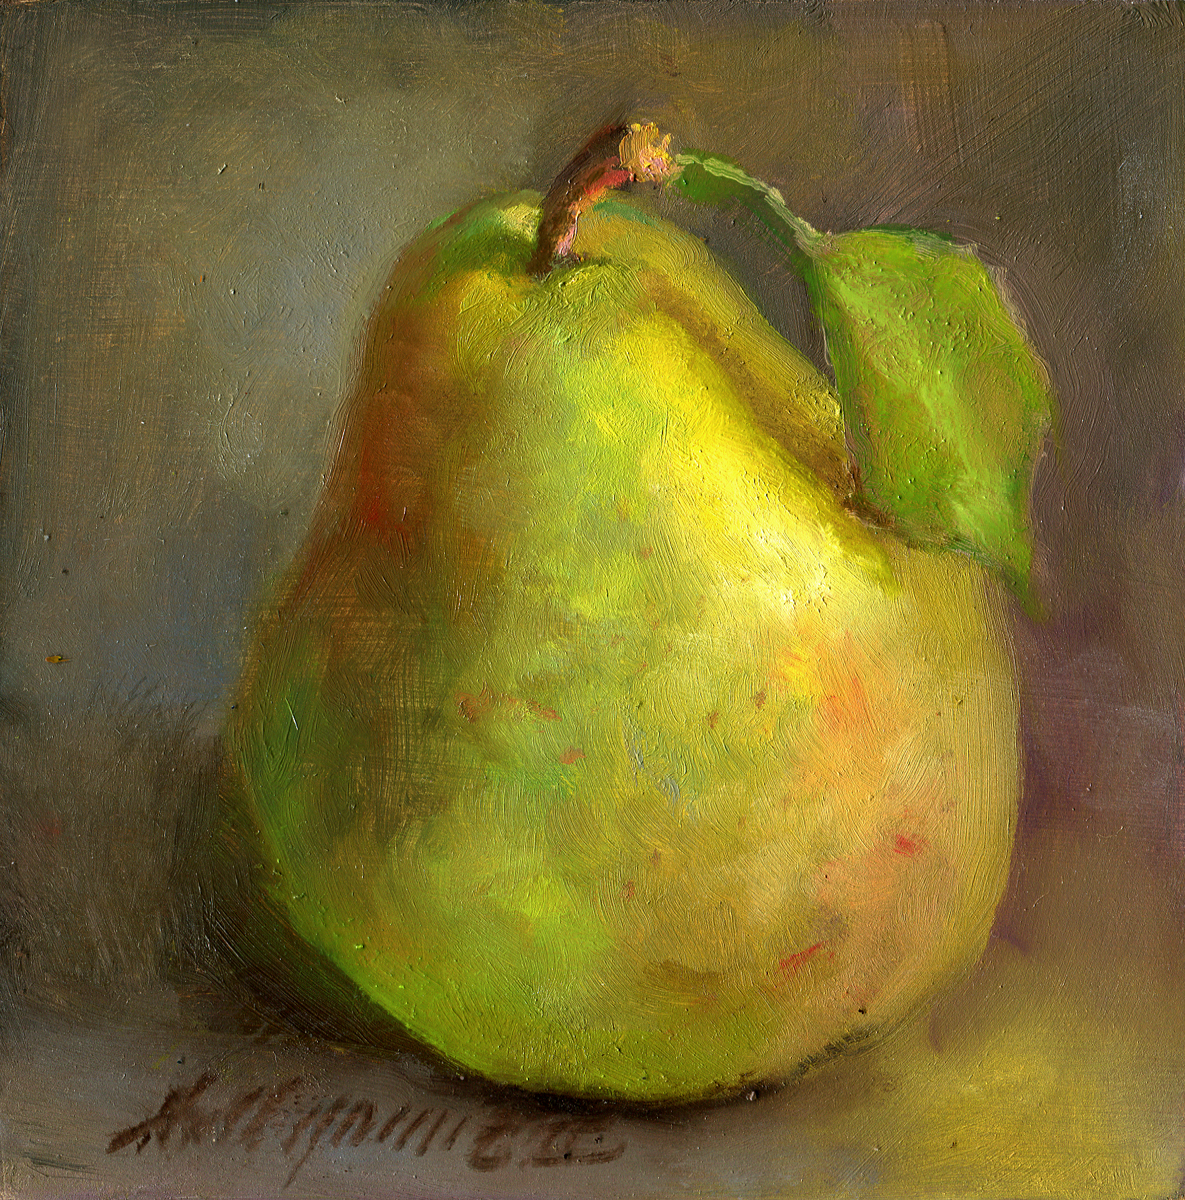 Hall Groat II Paintings: Bartlett Pear, Classical Fruit Painting 6"x6